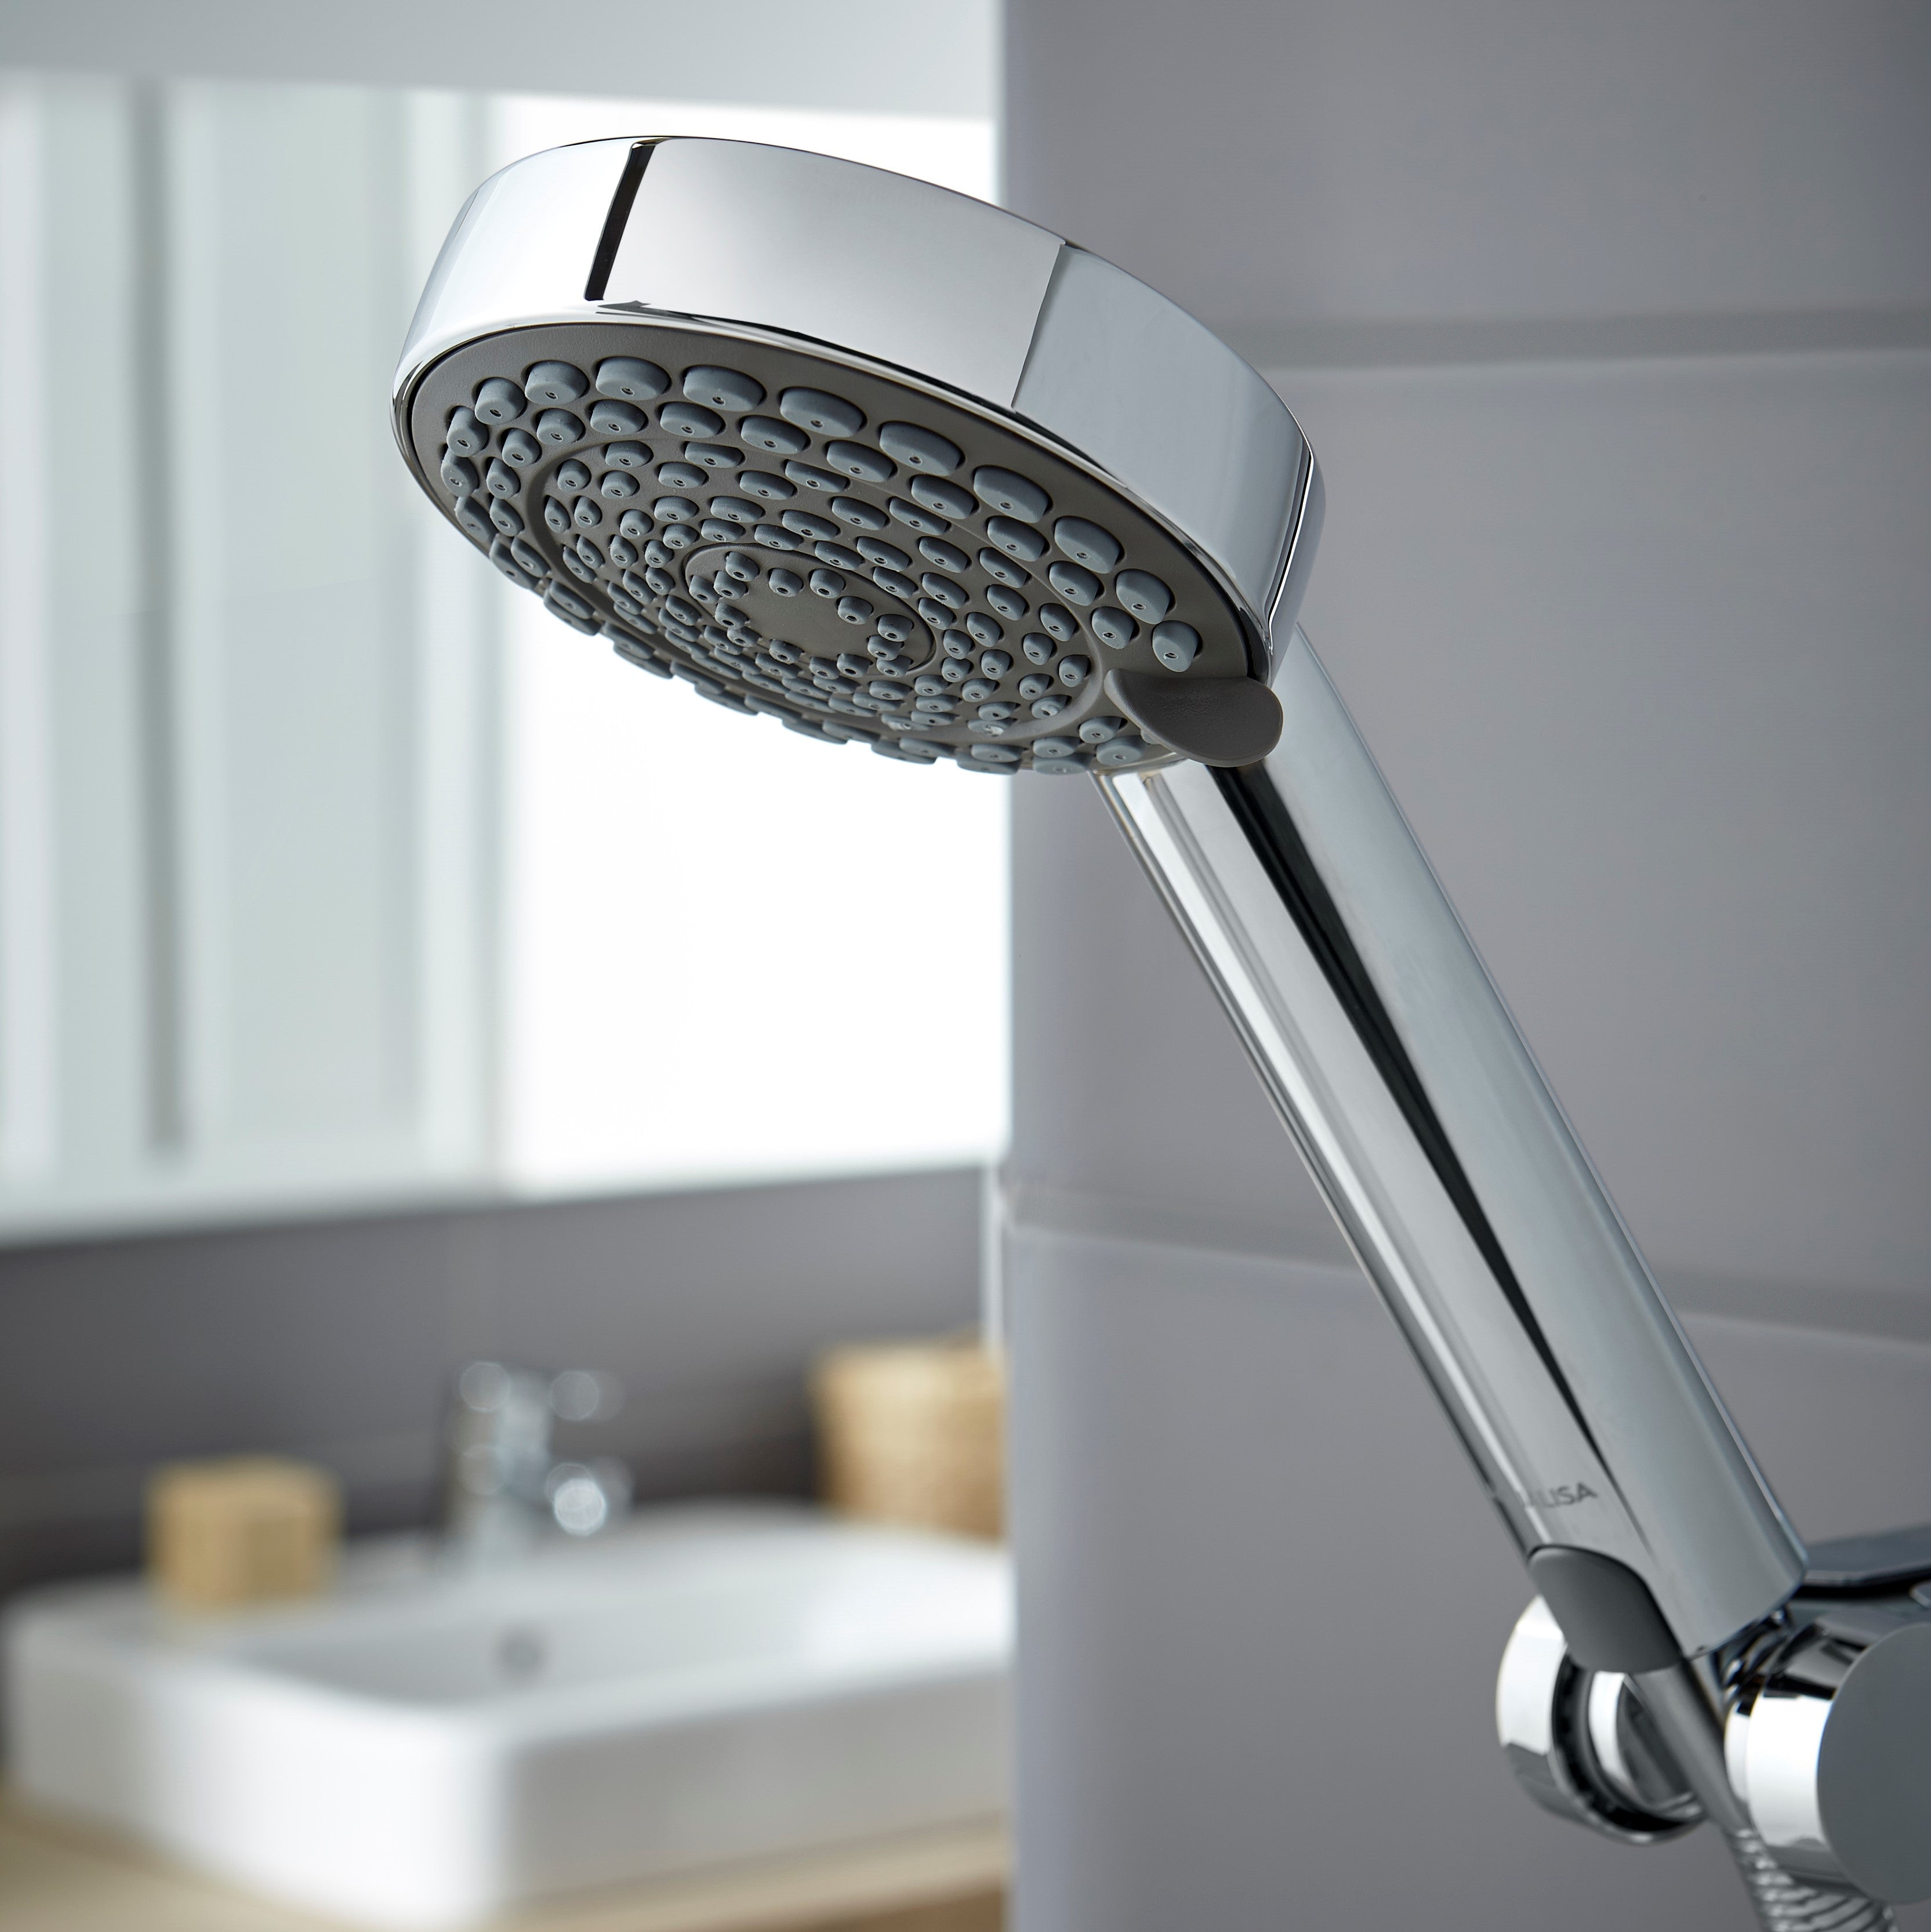 Aqualisa Lumi Electric 8.5Kw Shower With Adjustable Head against grey wall panels LME8501